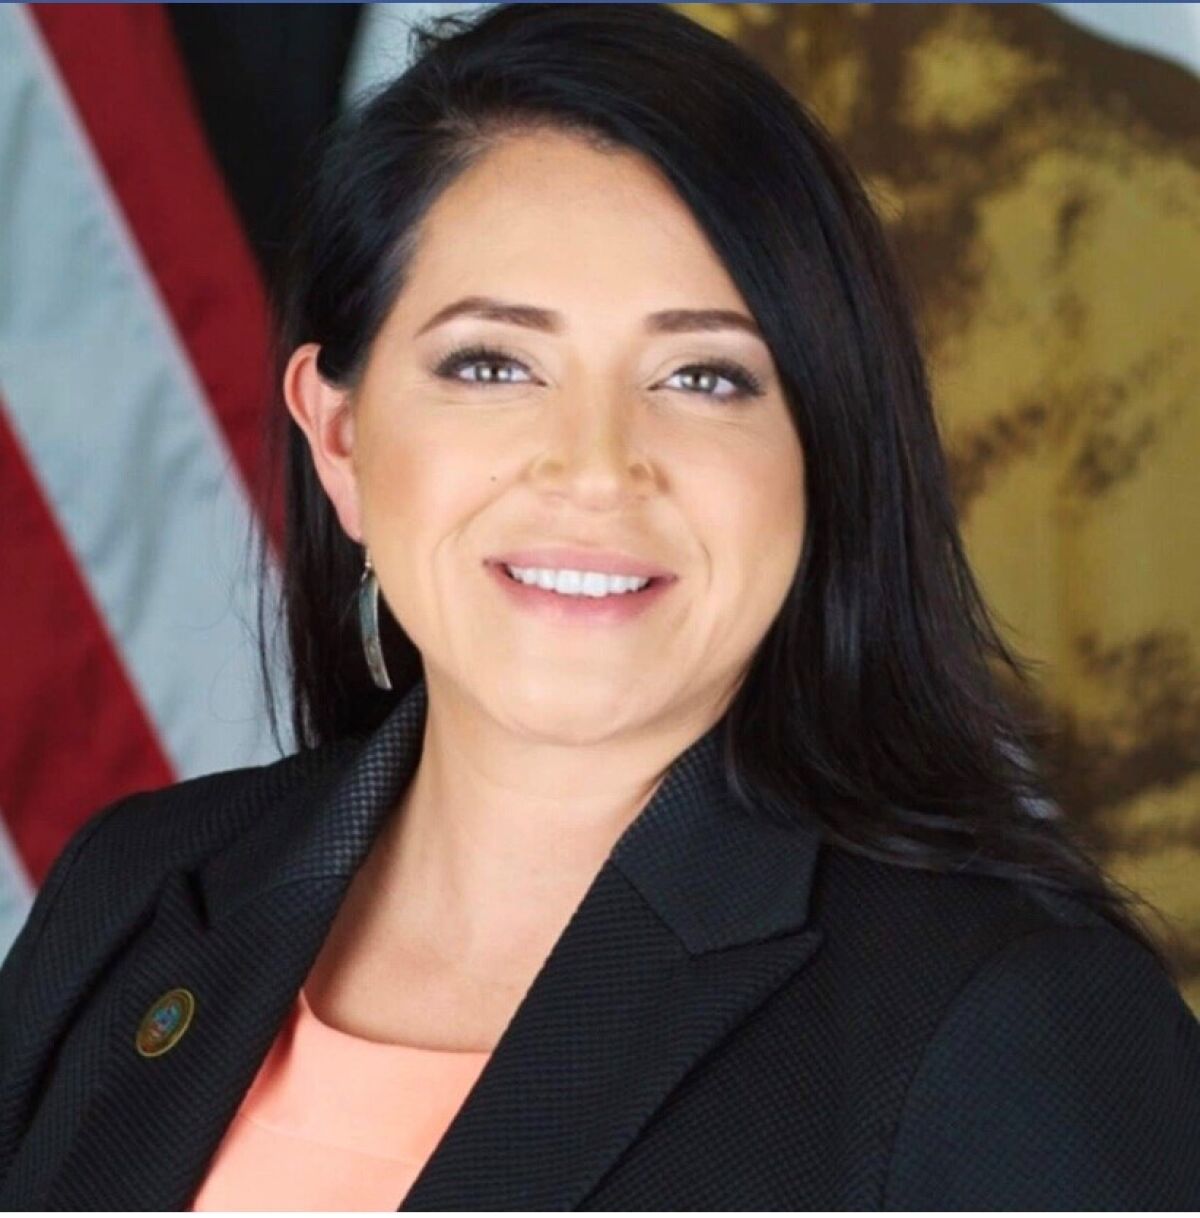 Liz Perez is running for the District 2 seat on the Vista City Council this fall.